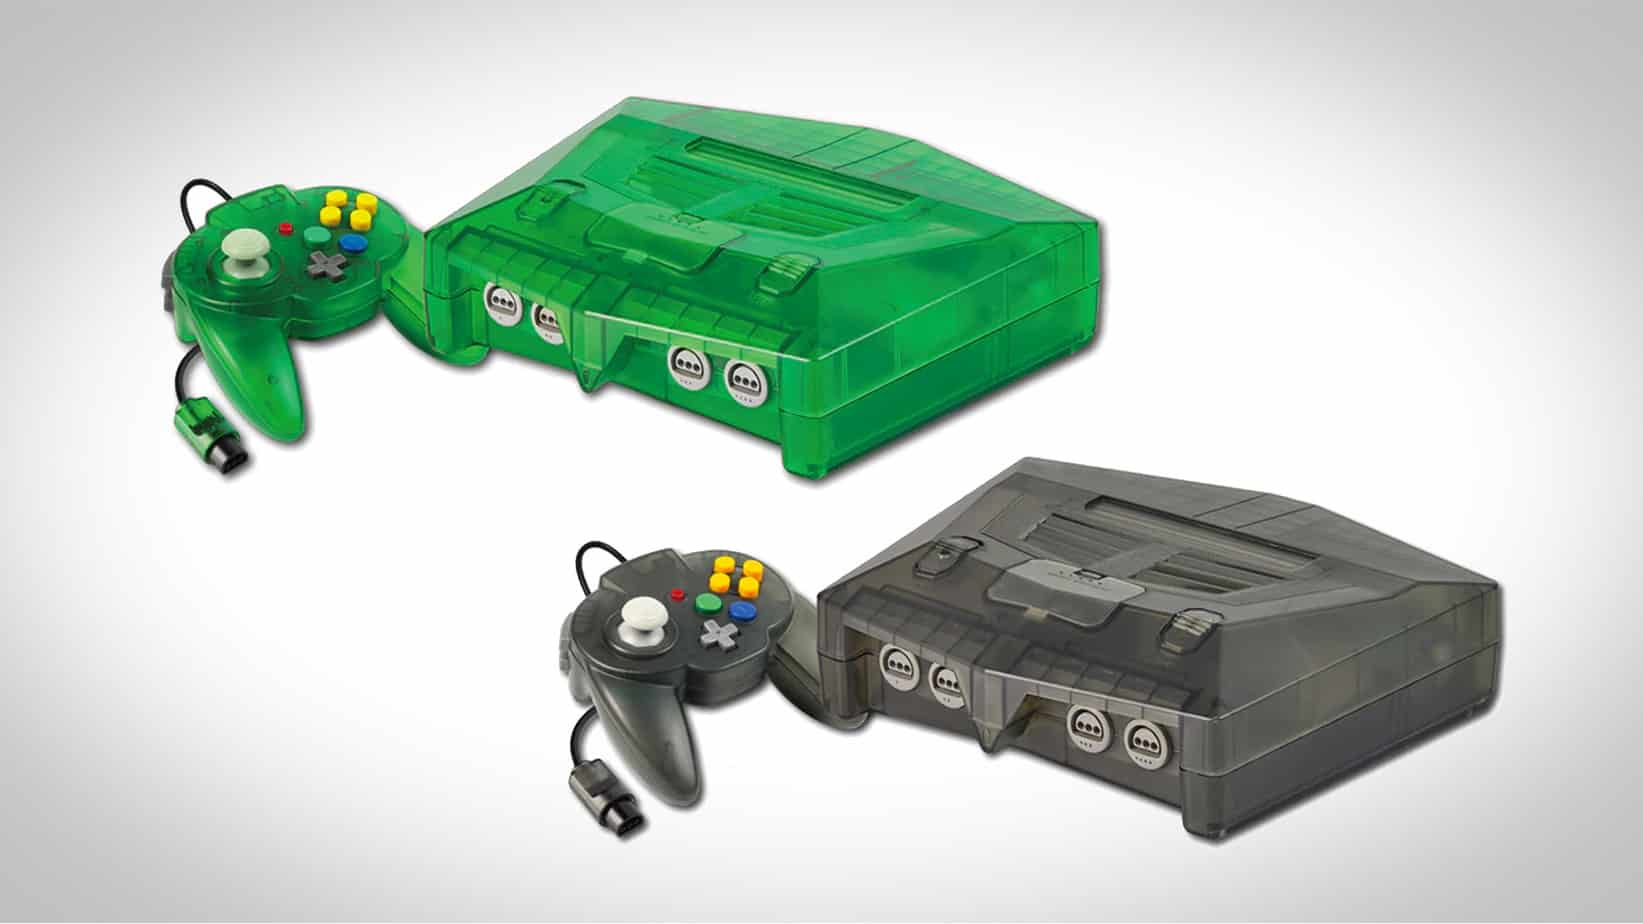 New emulator lets you play Nintendo 64 games from your web